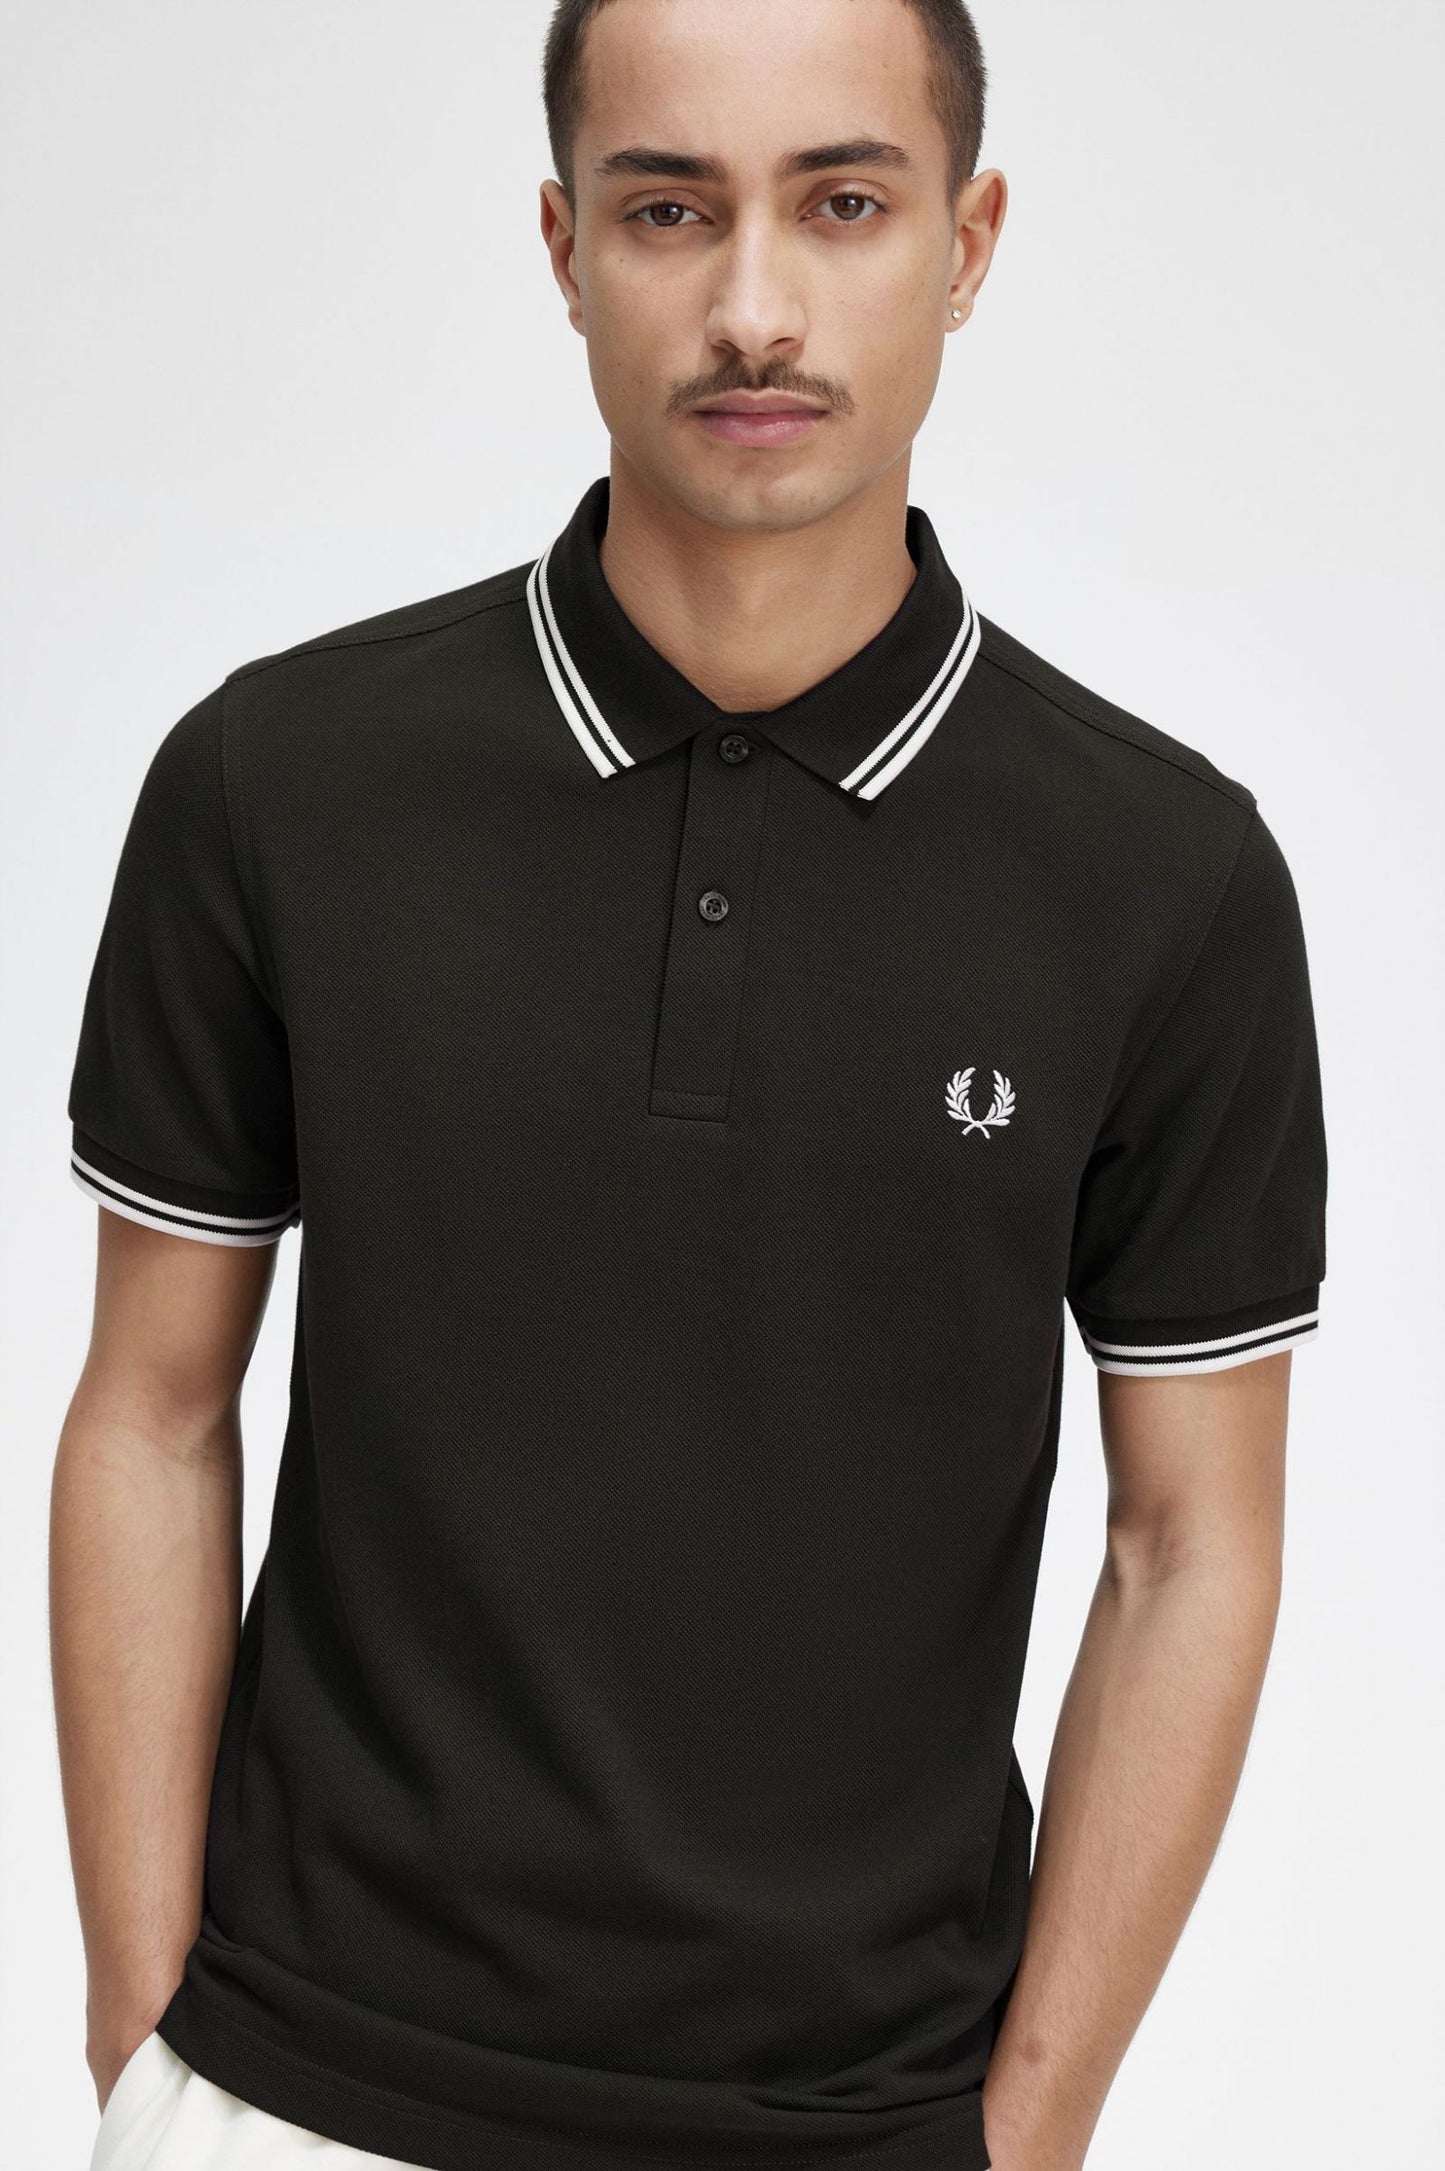 Polo FRED PERRY Shirt M3600 - VERDE T50